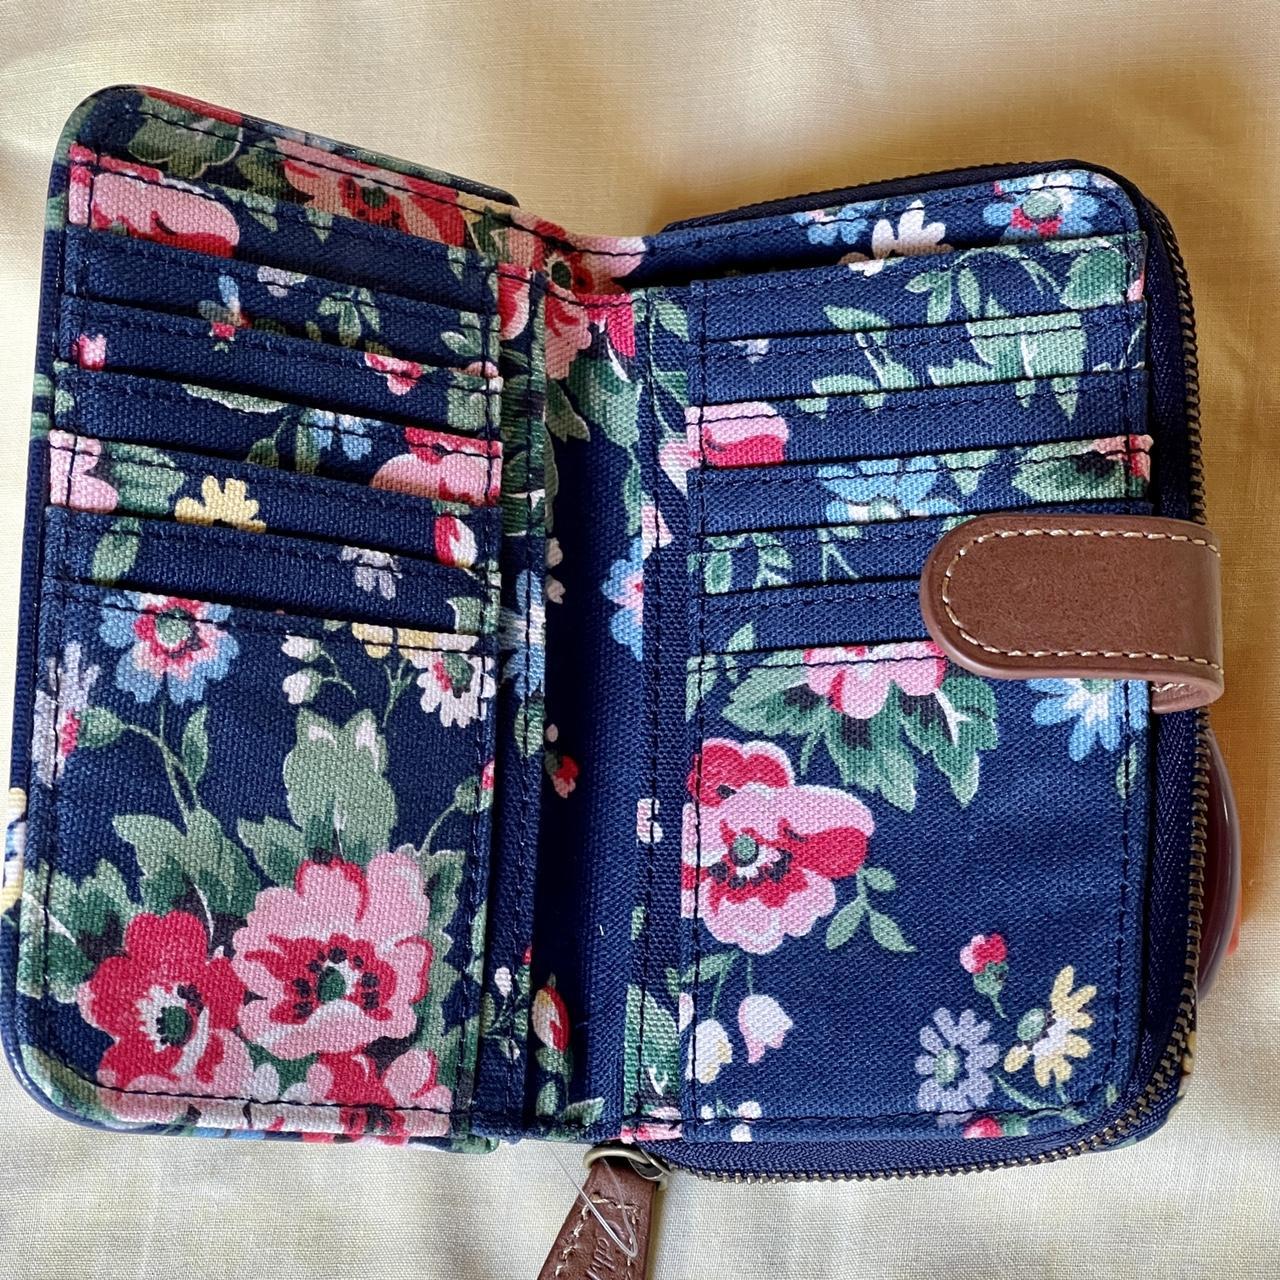 Cath Kidston Women's Navy and Pink Wallet-purses (2)